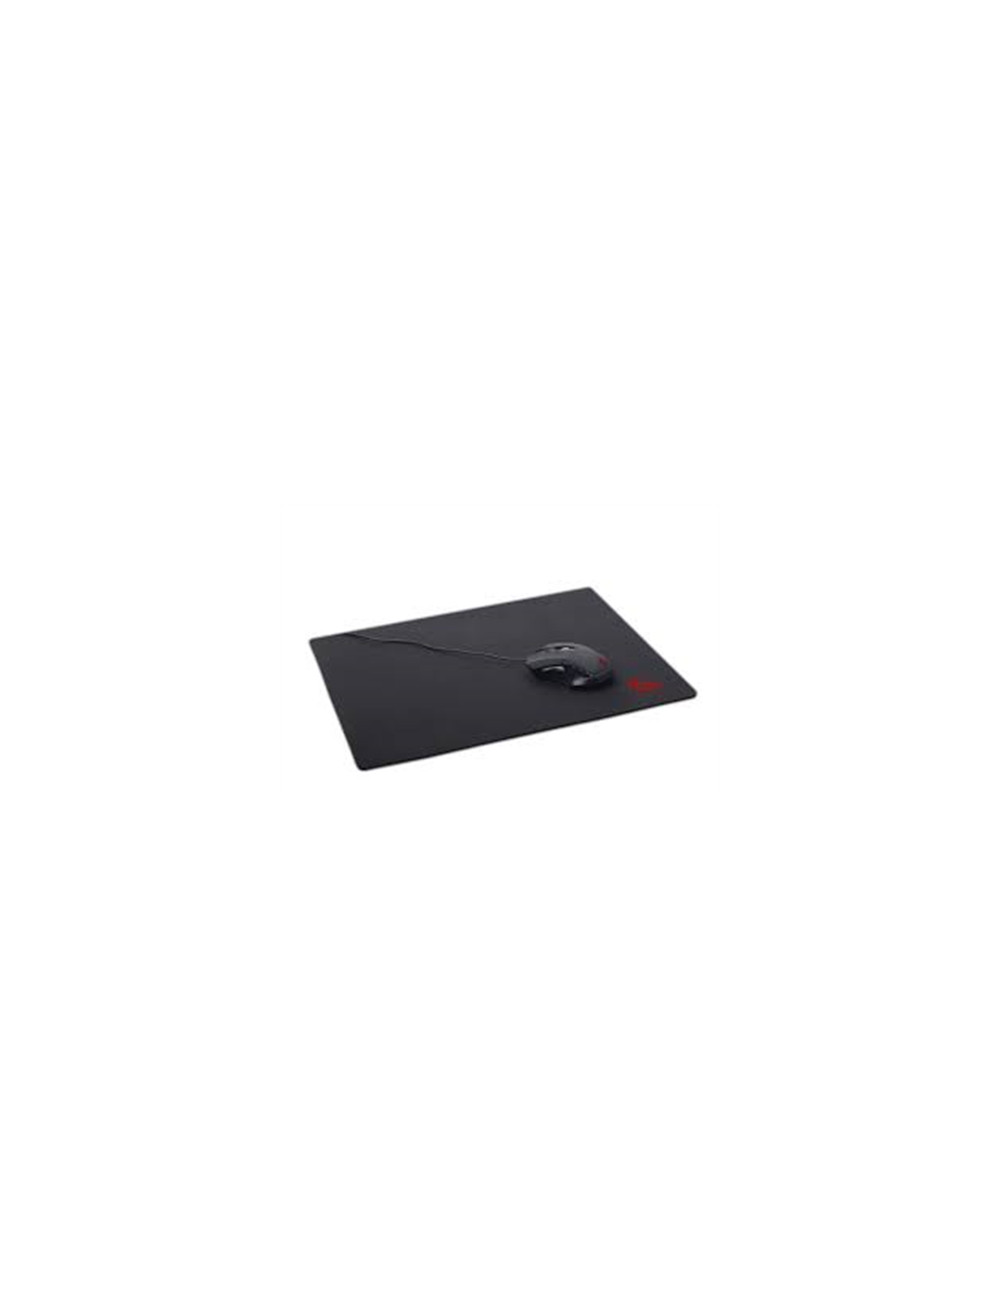 Gembird | natural rubber foam + fabric | MP-GAME-M | Gaming mouse pad, medium | Gaming mouse pad | 250x350x3 mm | Black